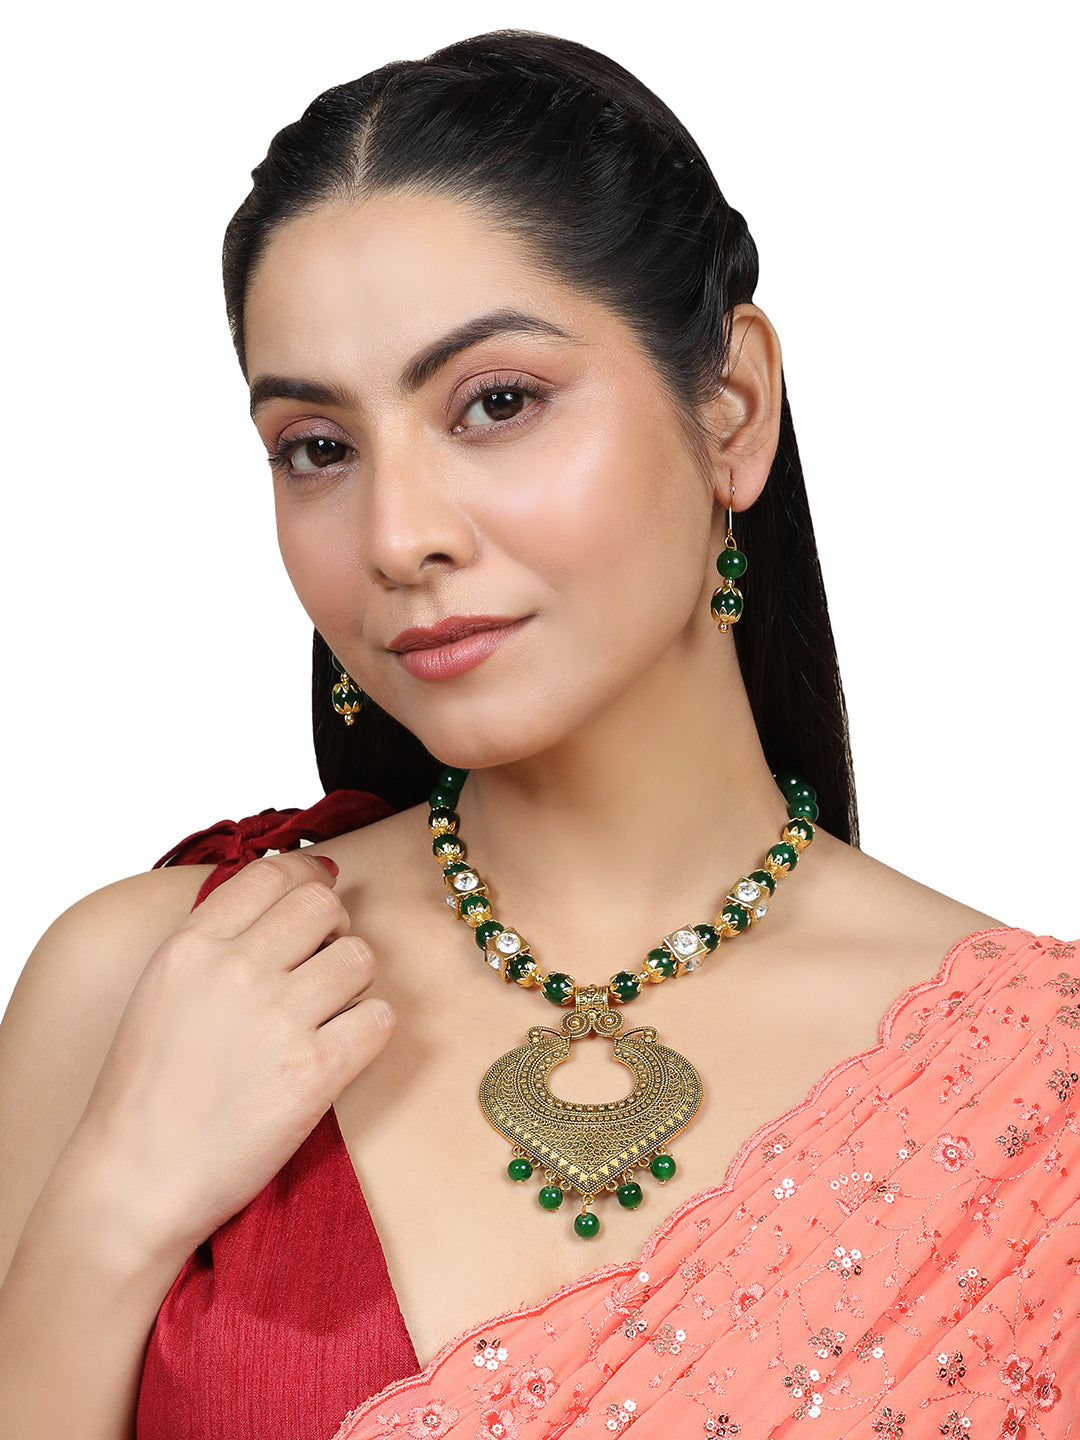 Women's/Girls Contemporary Gold Plated Leaf Shaped Pendant And Earring Set Studded With Beads - Mode Mania